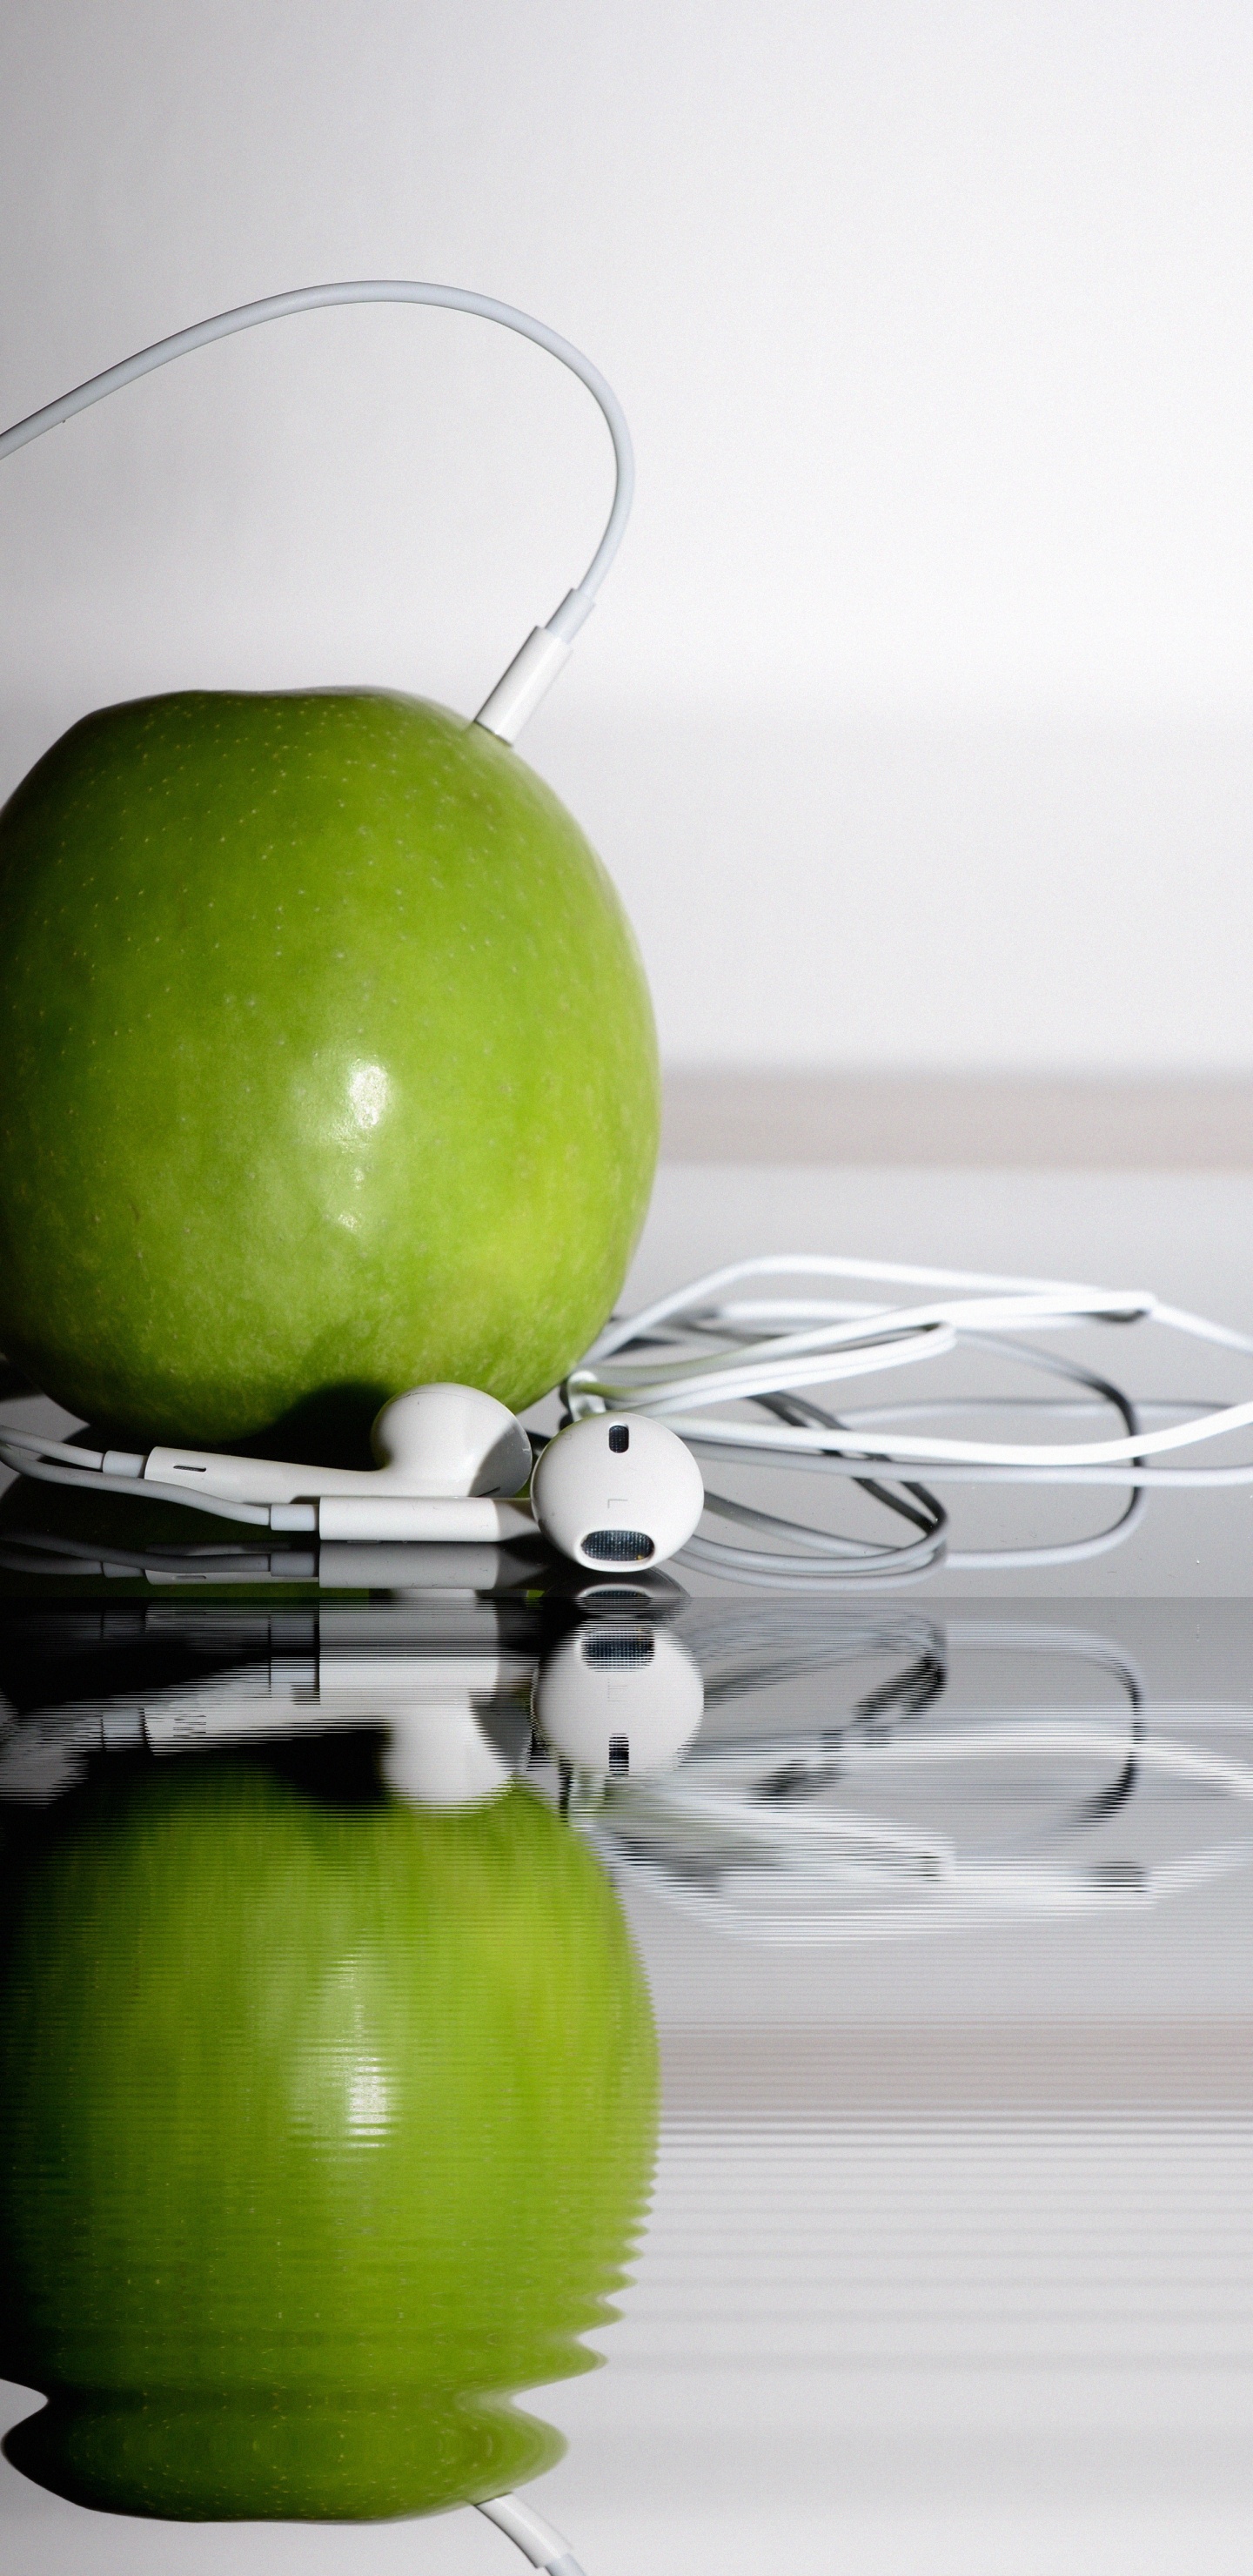 Apple Auriculares, Auriculares, Verde, Granny Smith, Apple. Wallpaper in 1440x2960 Resolution